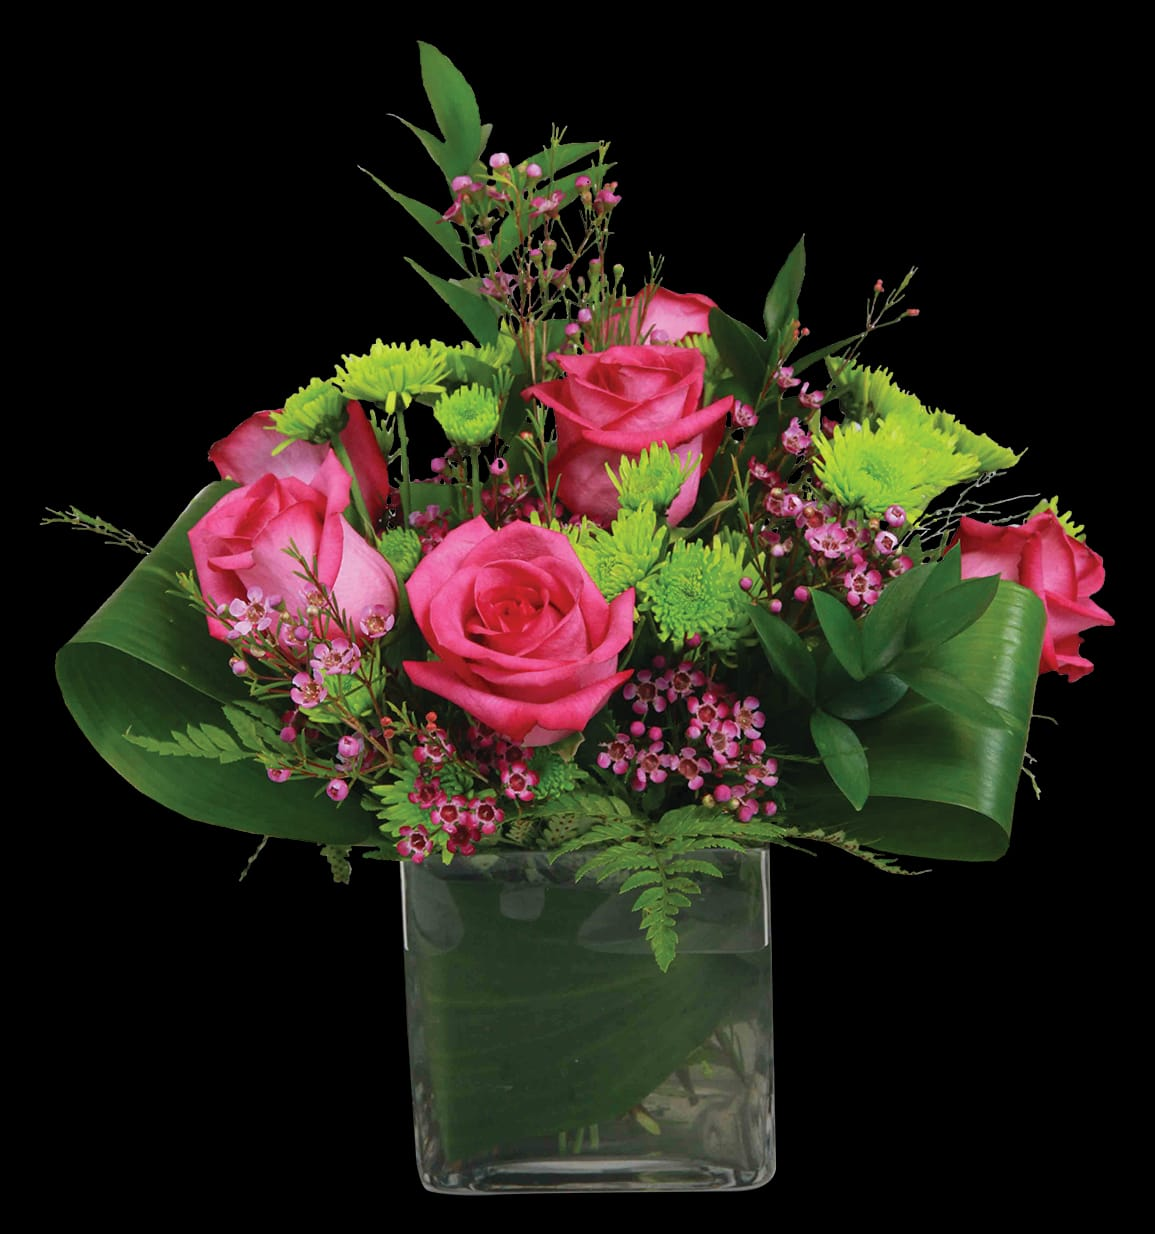 A fresh arrangement with pink roses, mums, greens and fillers.